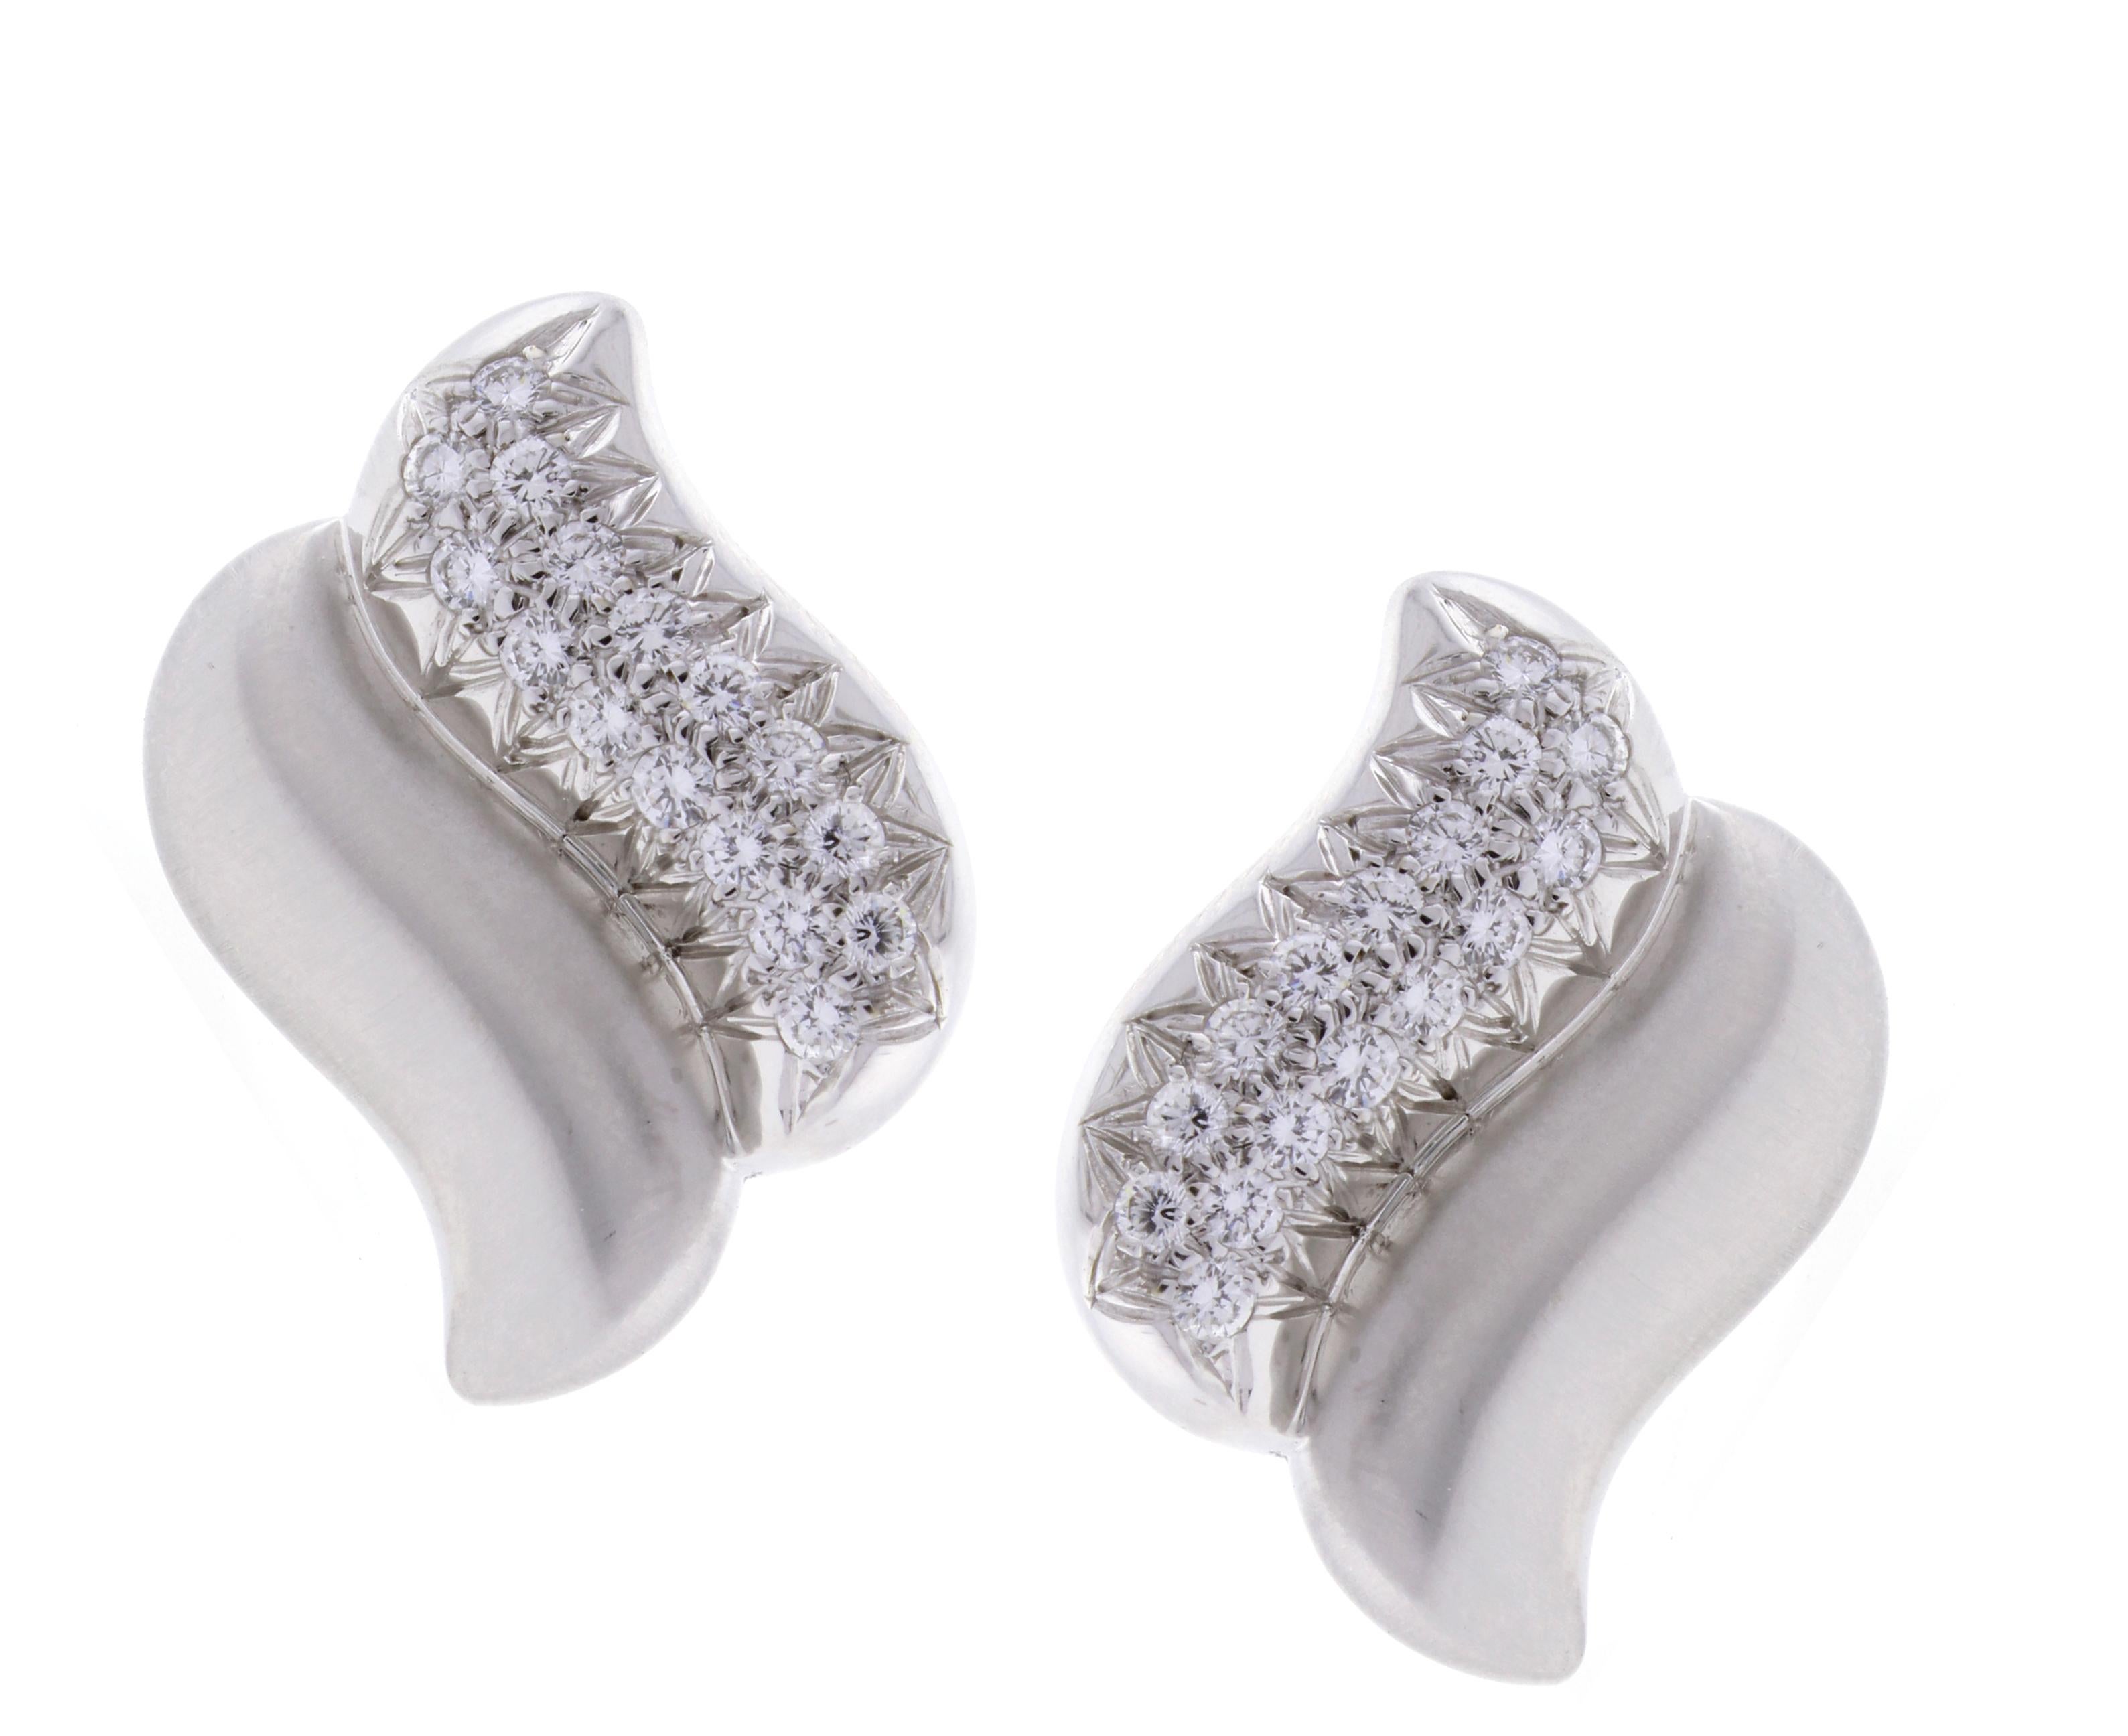 From Marlene Stowe, a pair of 18 karat white gold and diamond earrings. The earrings are designed as a double wave or 